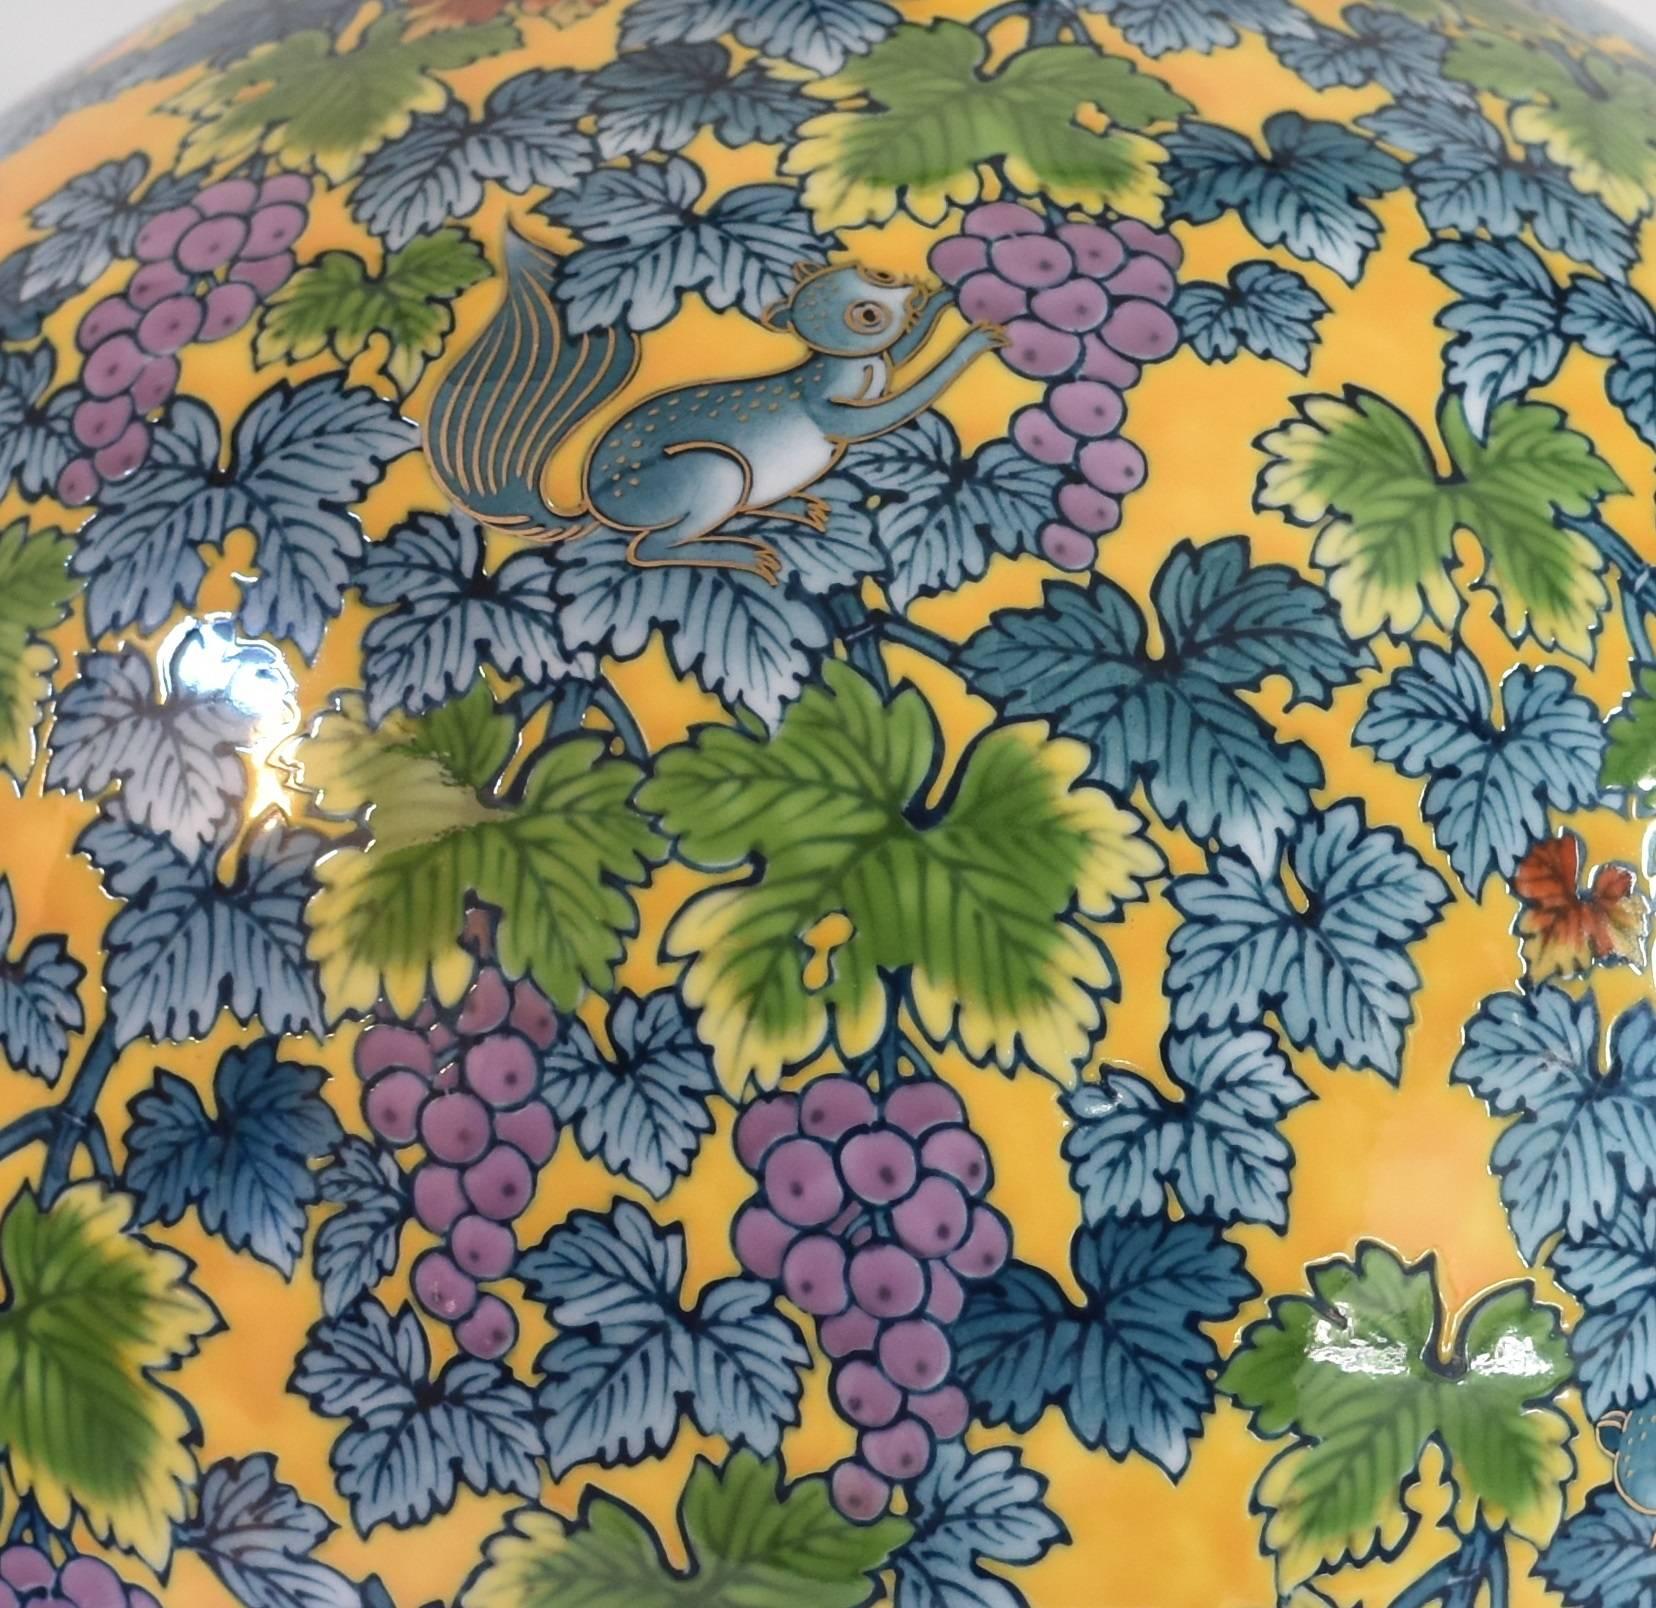 Unique large Japanese contemporary decorative vase, hand-painted on a beautifully shaped high quality porcelain body in vivid yellow, blue and green, a signed piece by highly acclaimed award-winning master porcelain artist of the Imari-Arita region